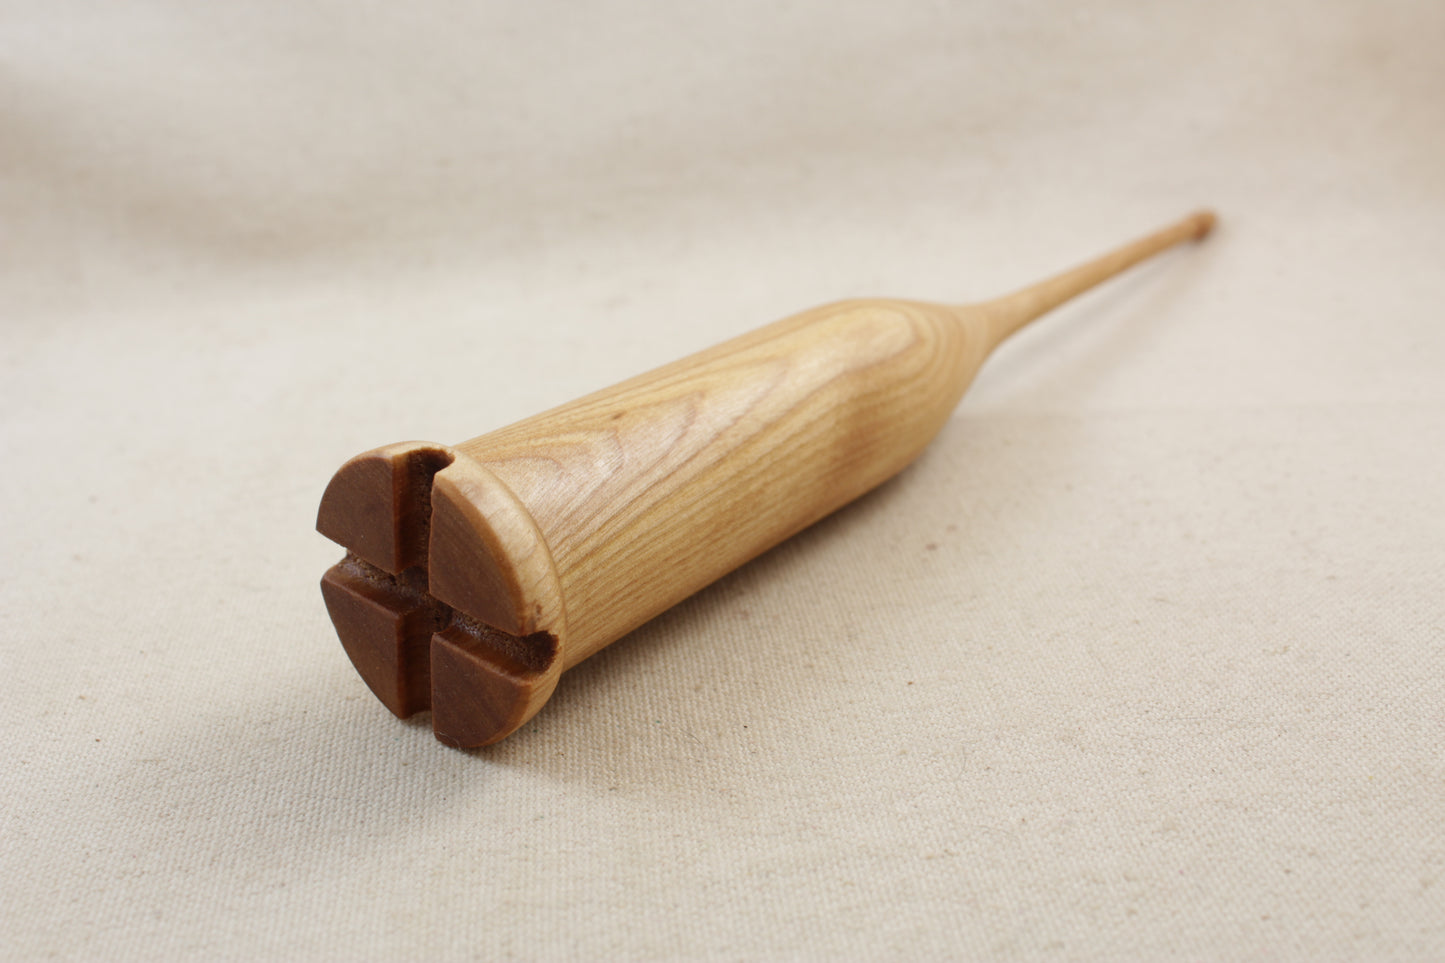 Birch Scottish style drop spindle 9 inch